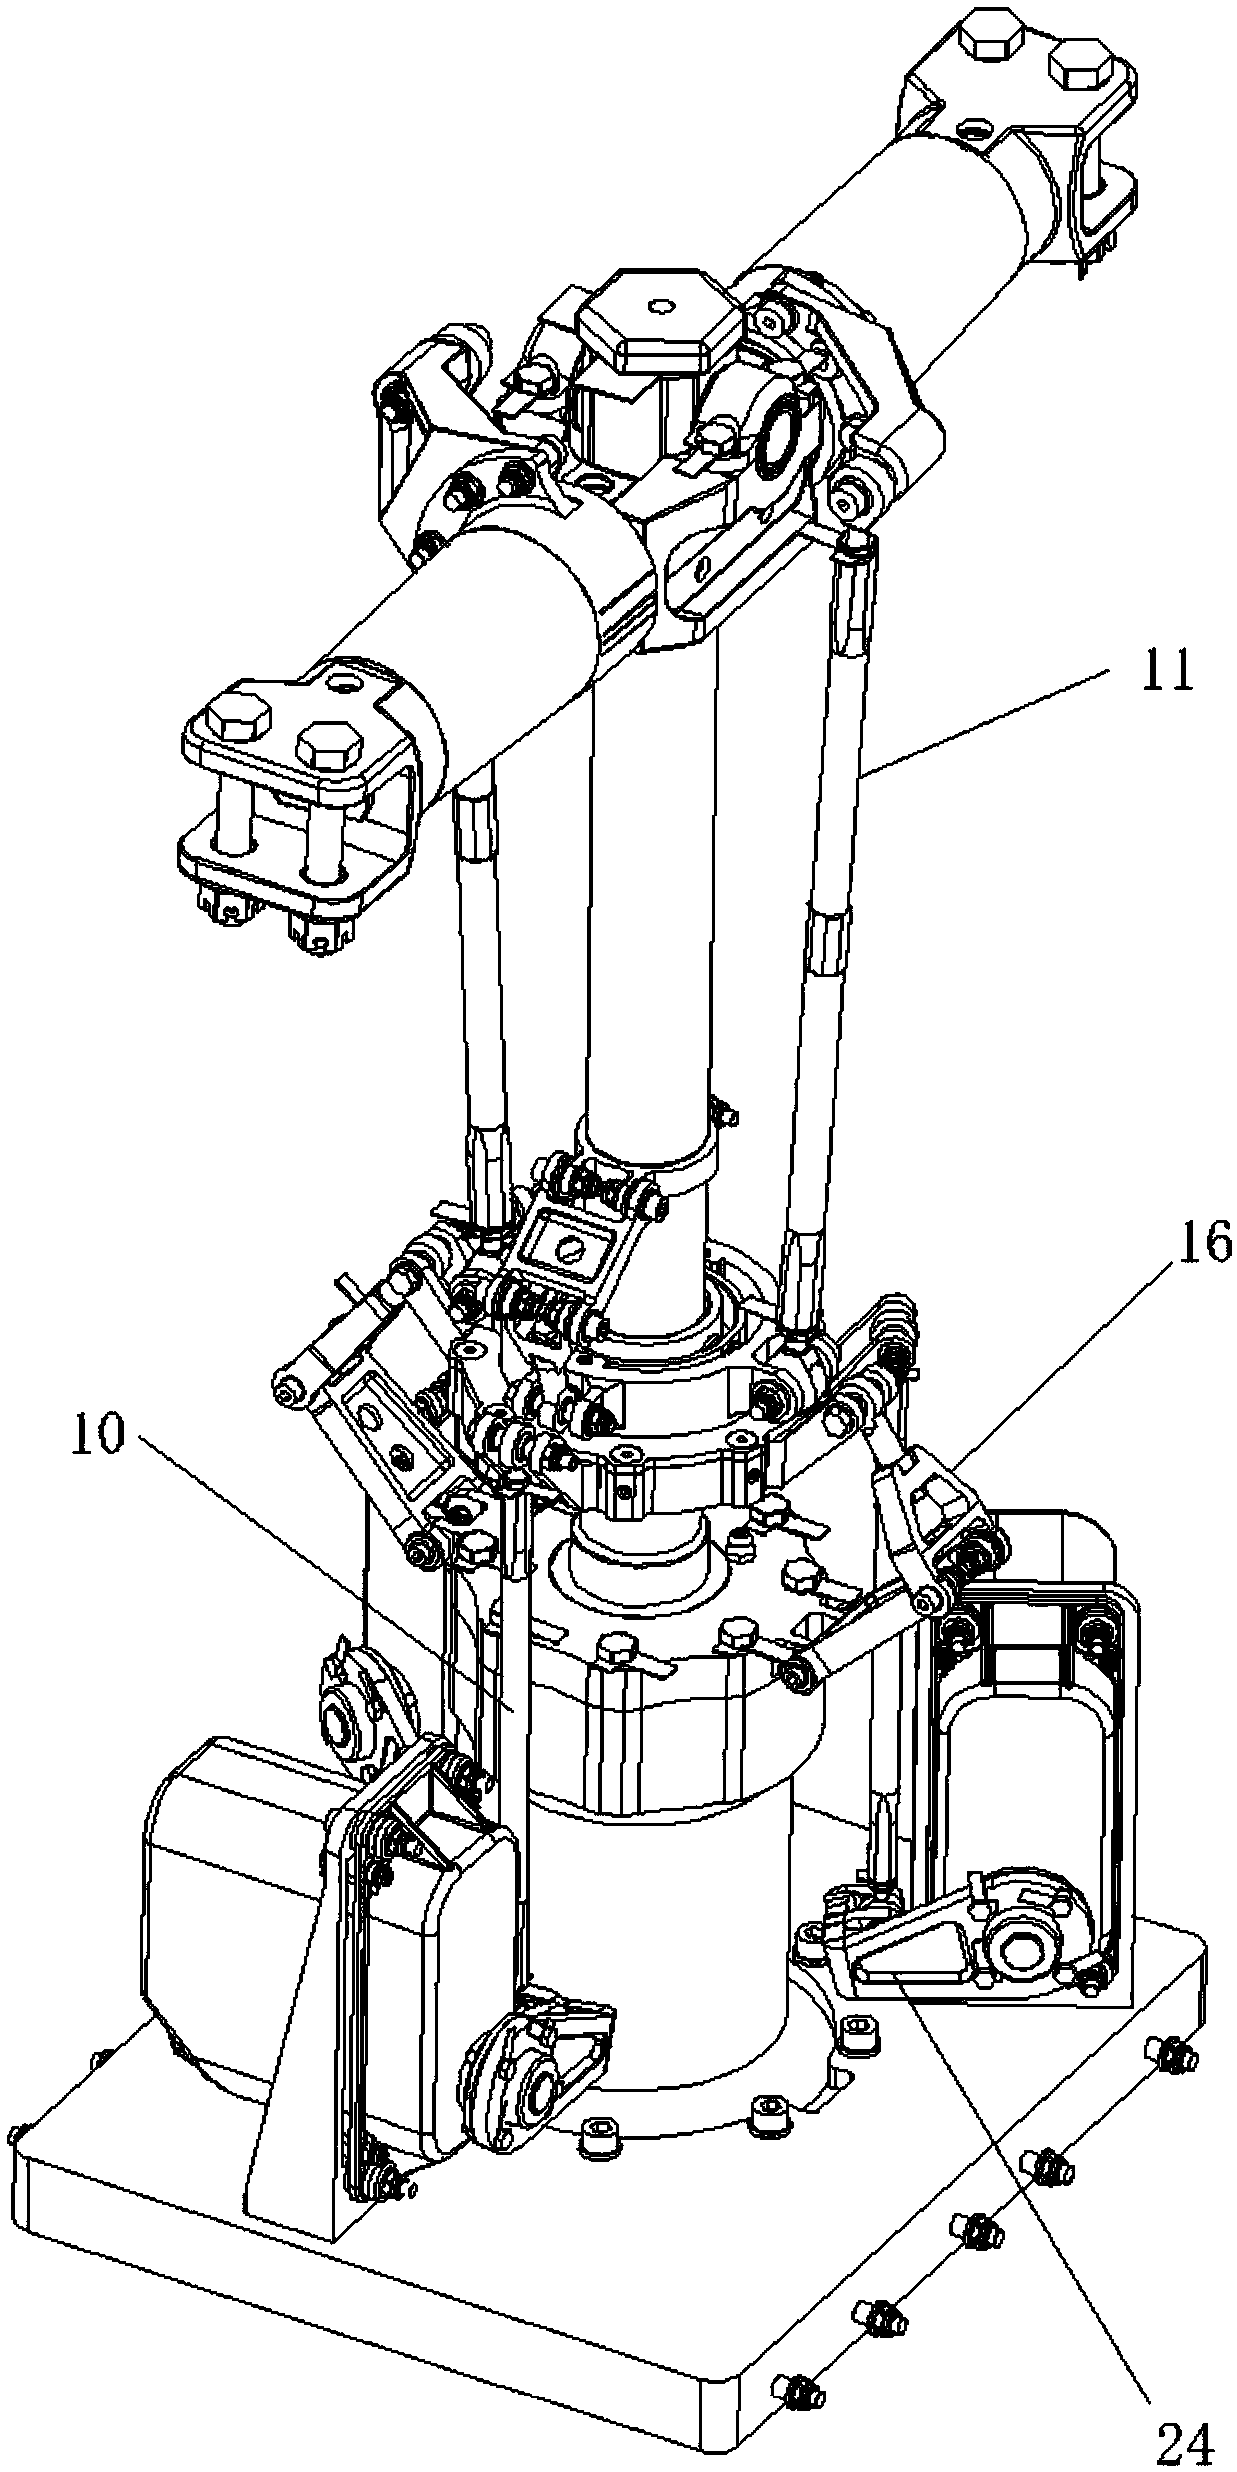 Helicopter main paddle assembly and helicopter